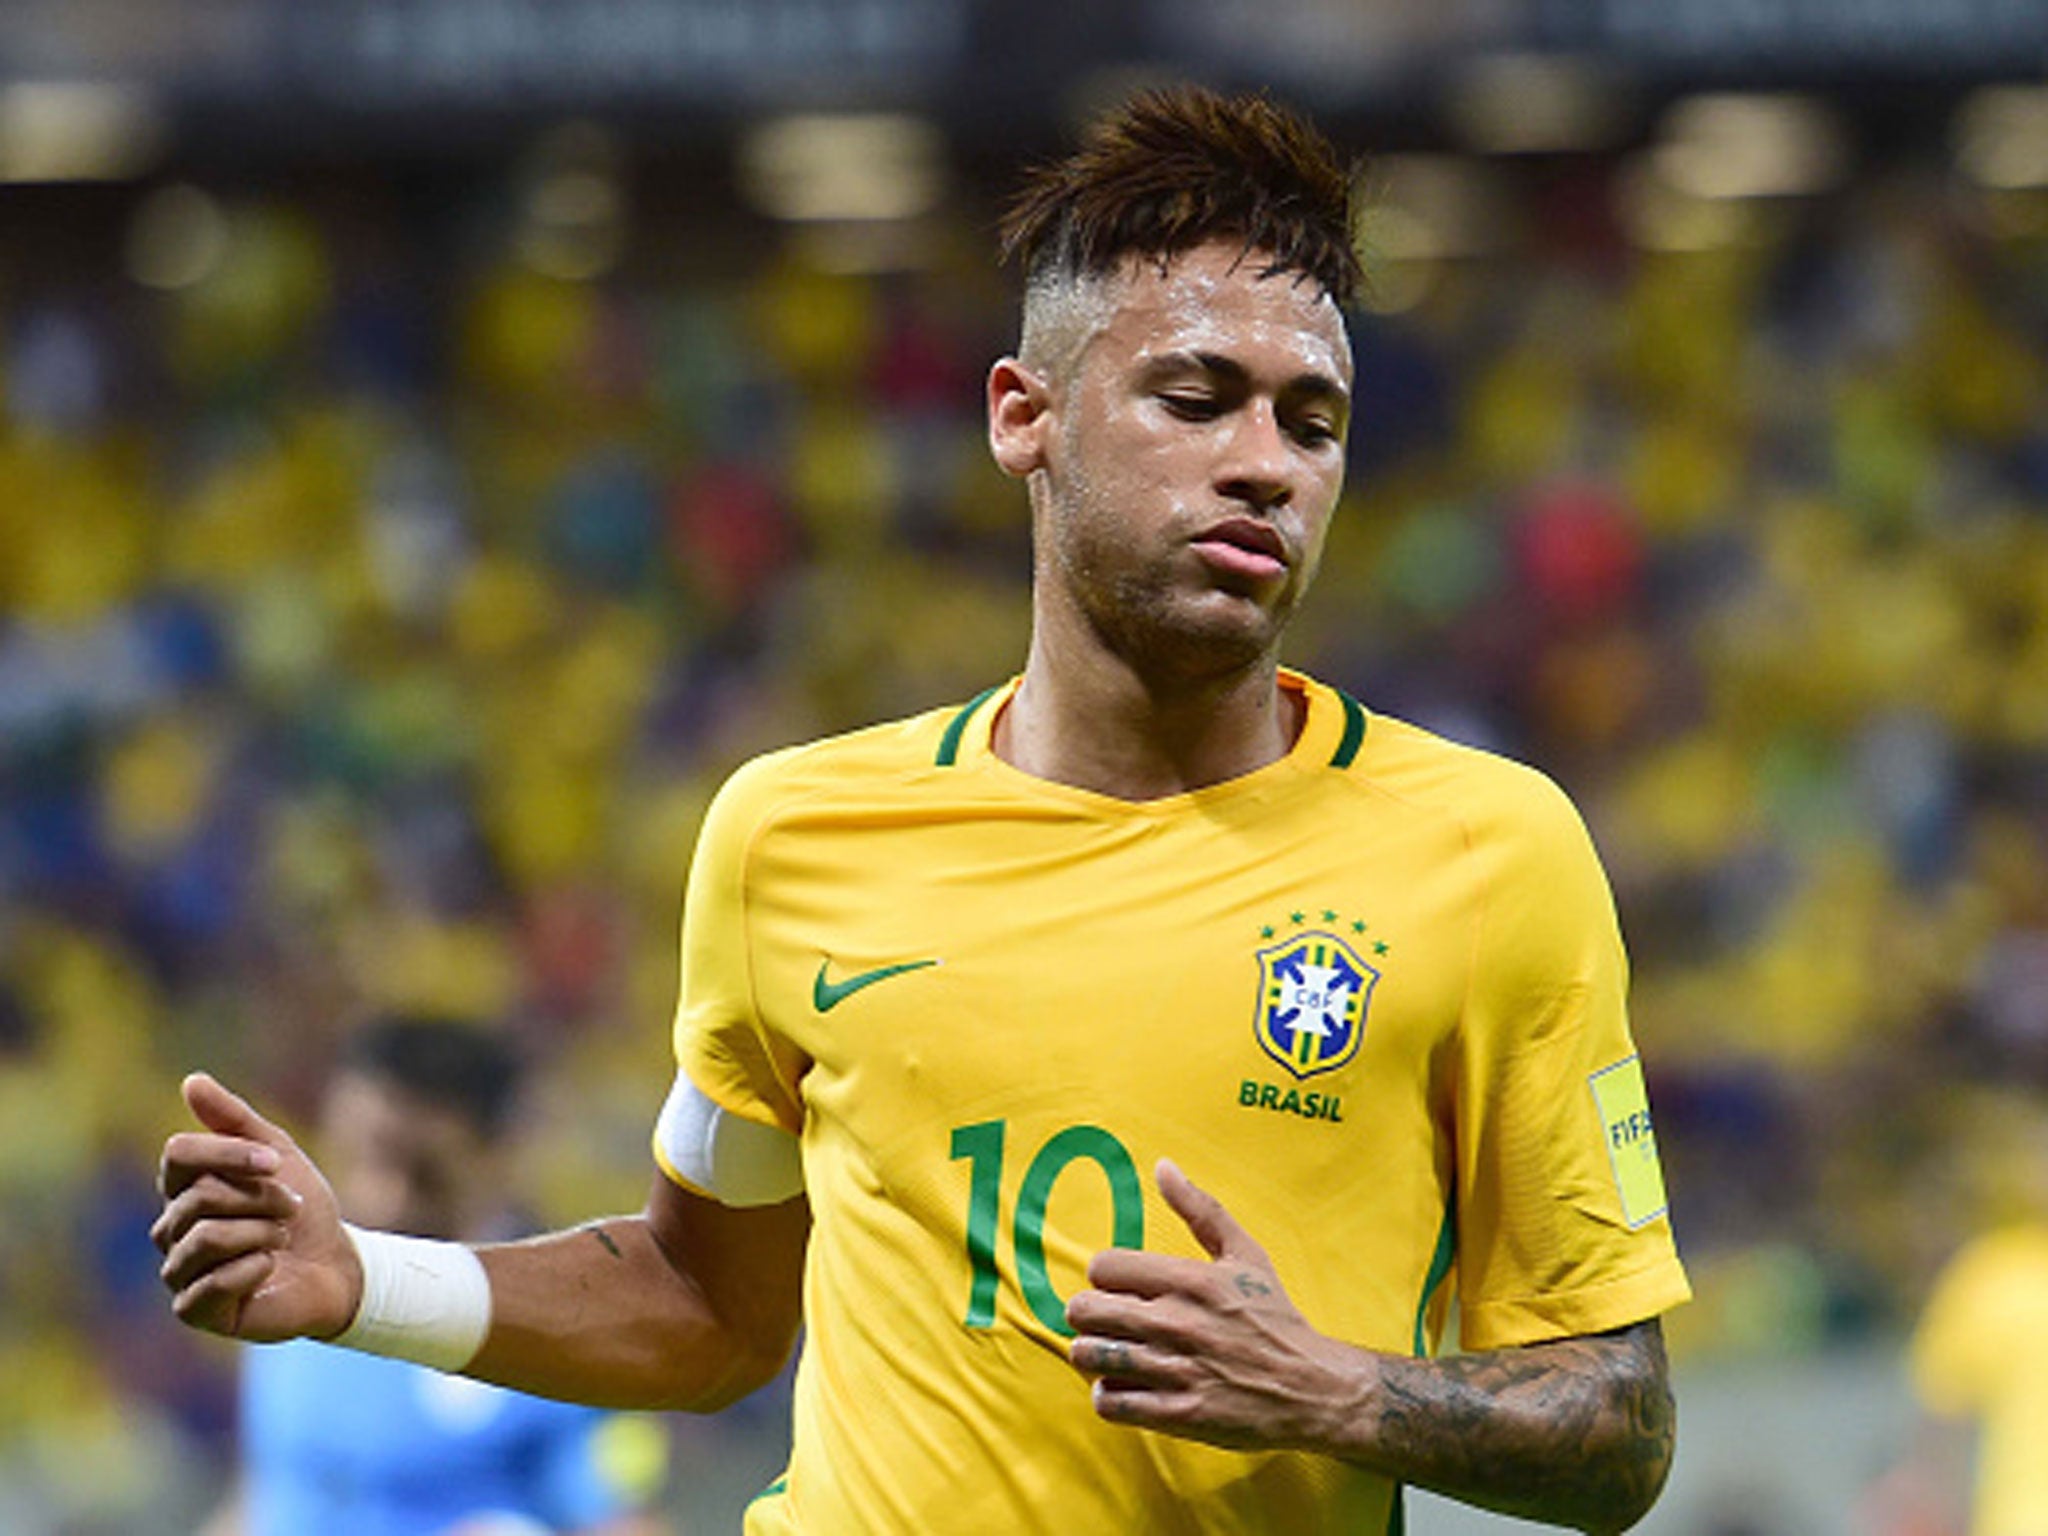 &#13;
Neymar will not be appearing at the Copa America, choosing instead to take part in the Olympic Games (Getty)&#13;